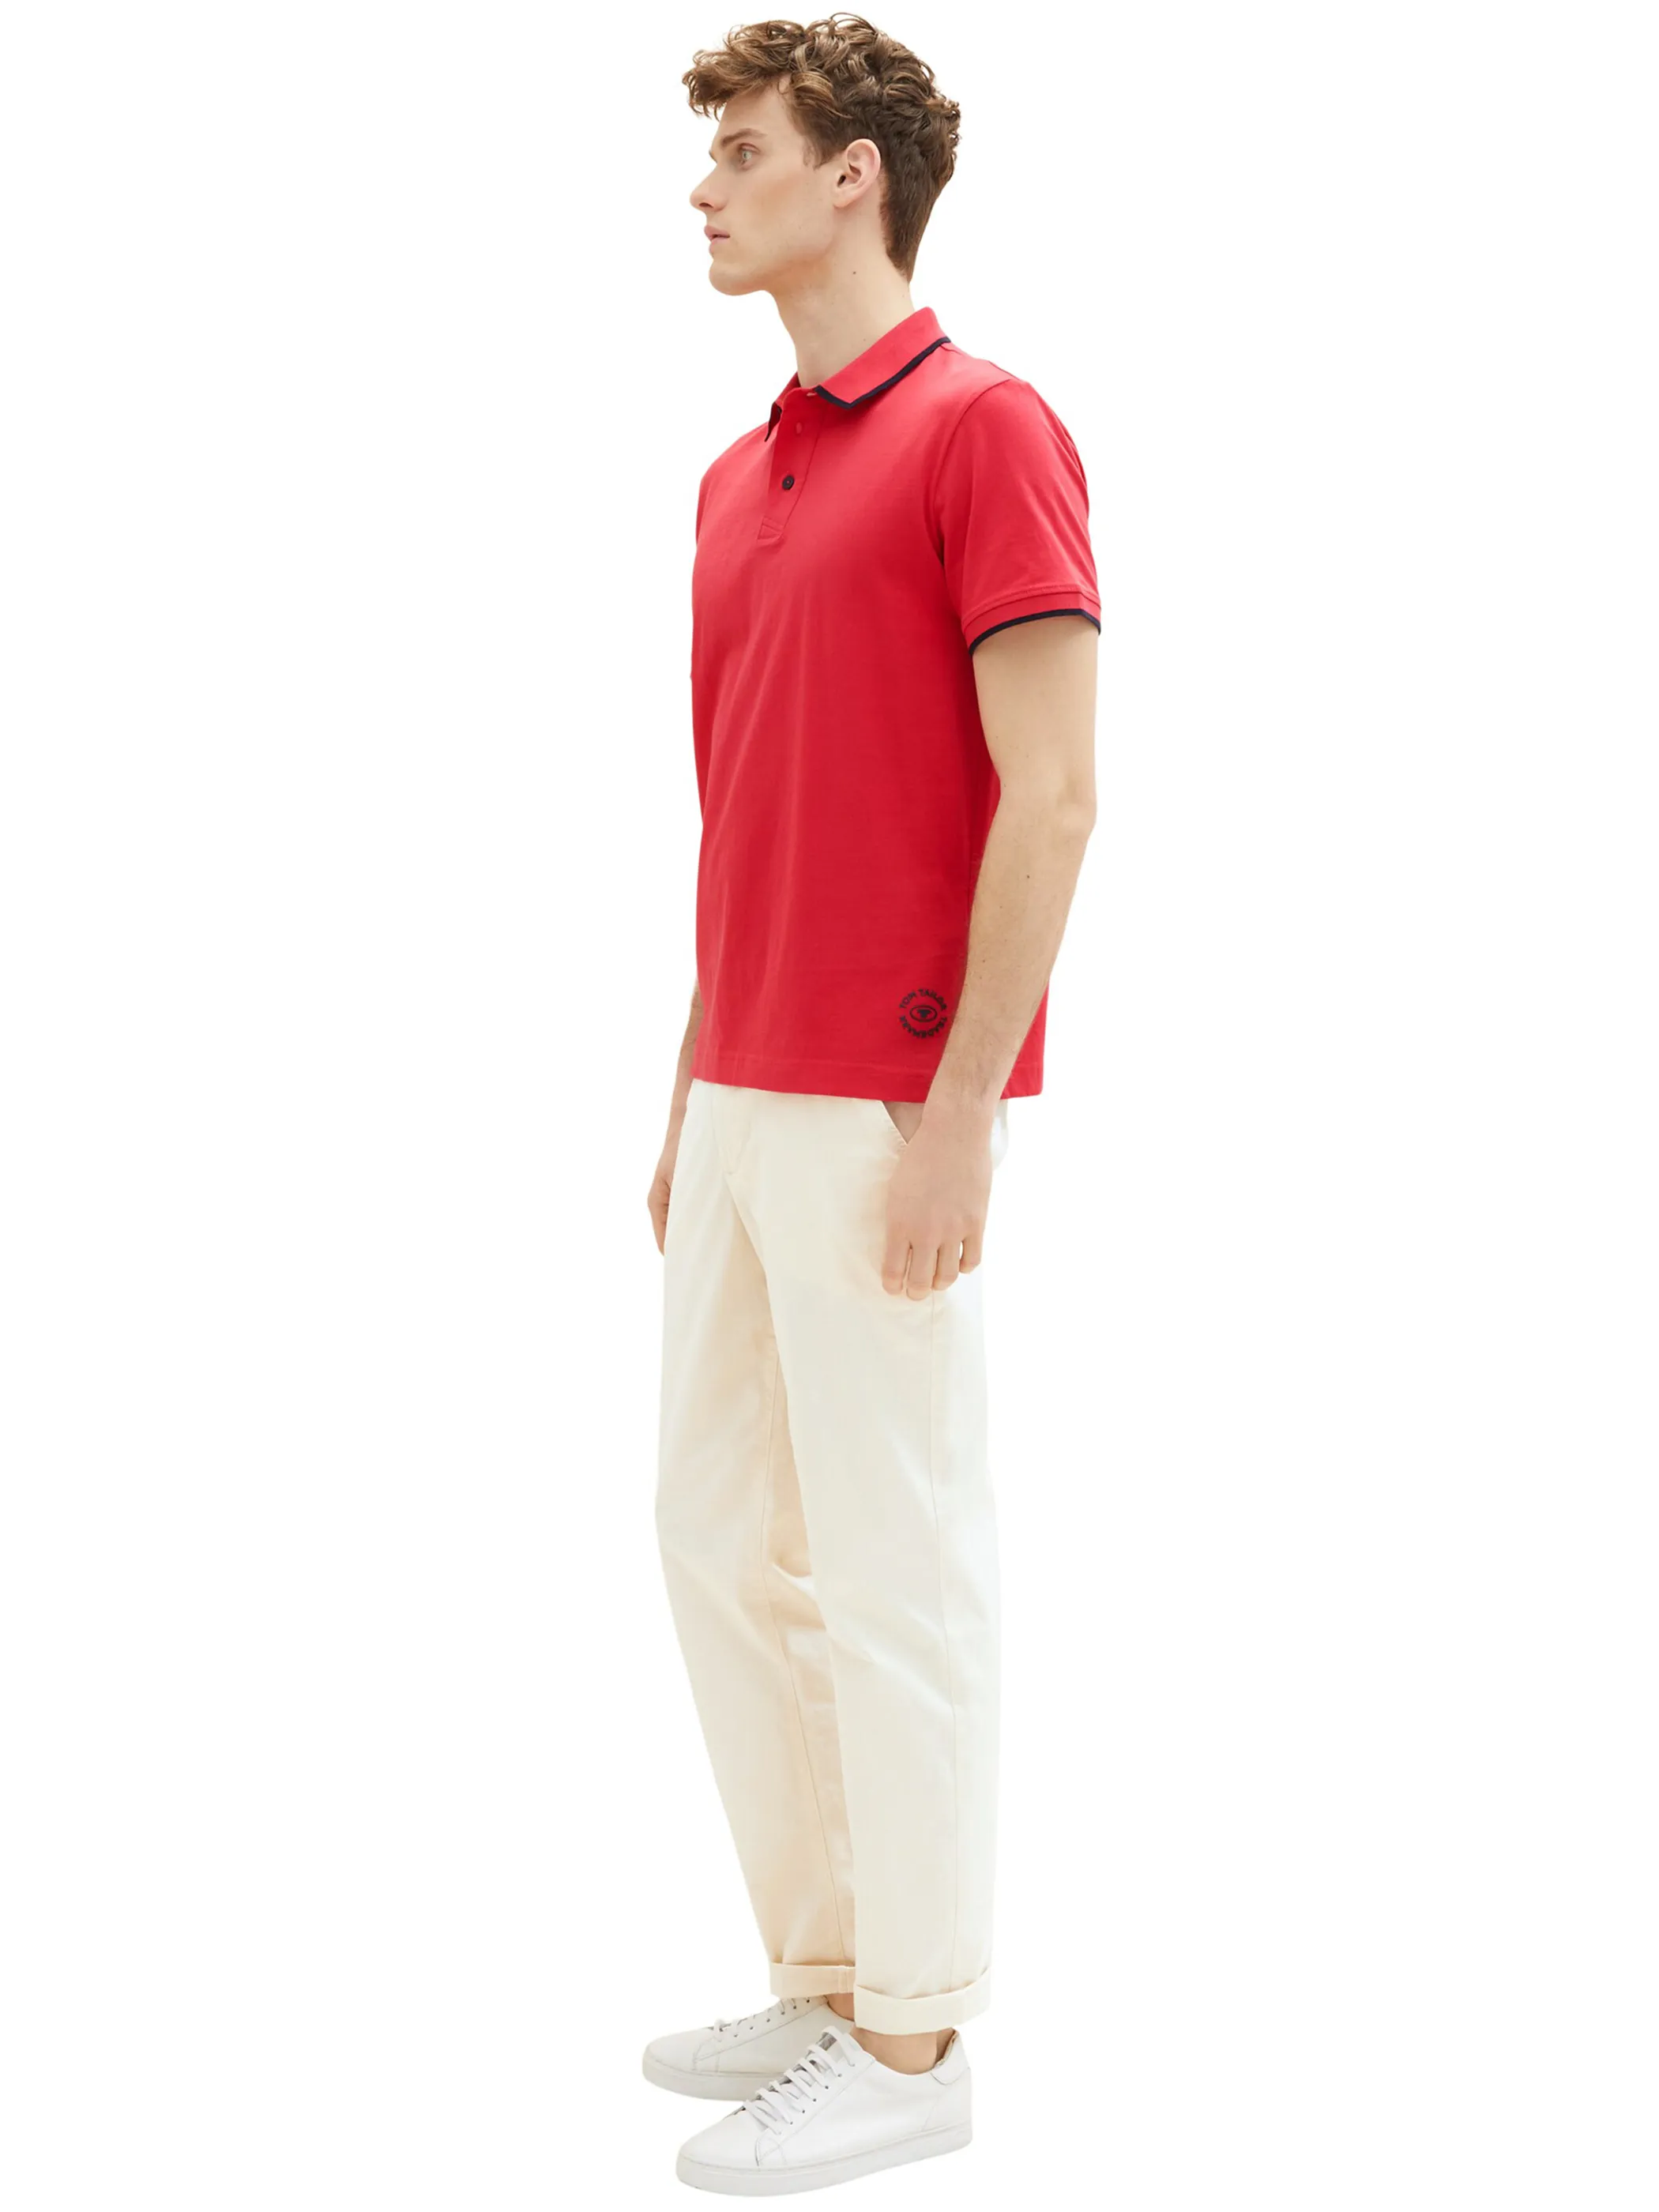 Tom Tailor 1036327 sportive jersey polo Rot 880547 31045 4